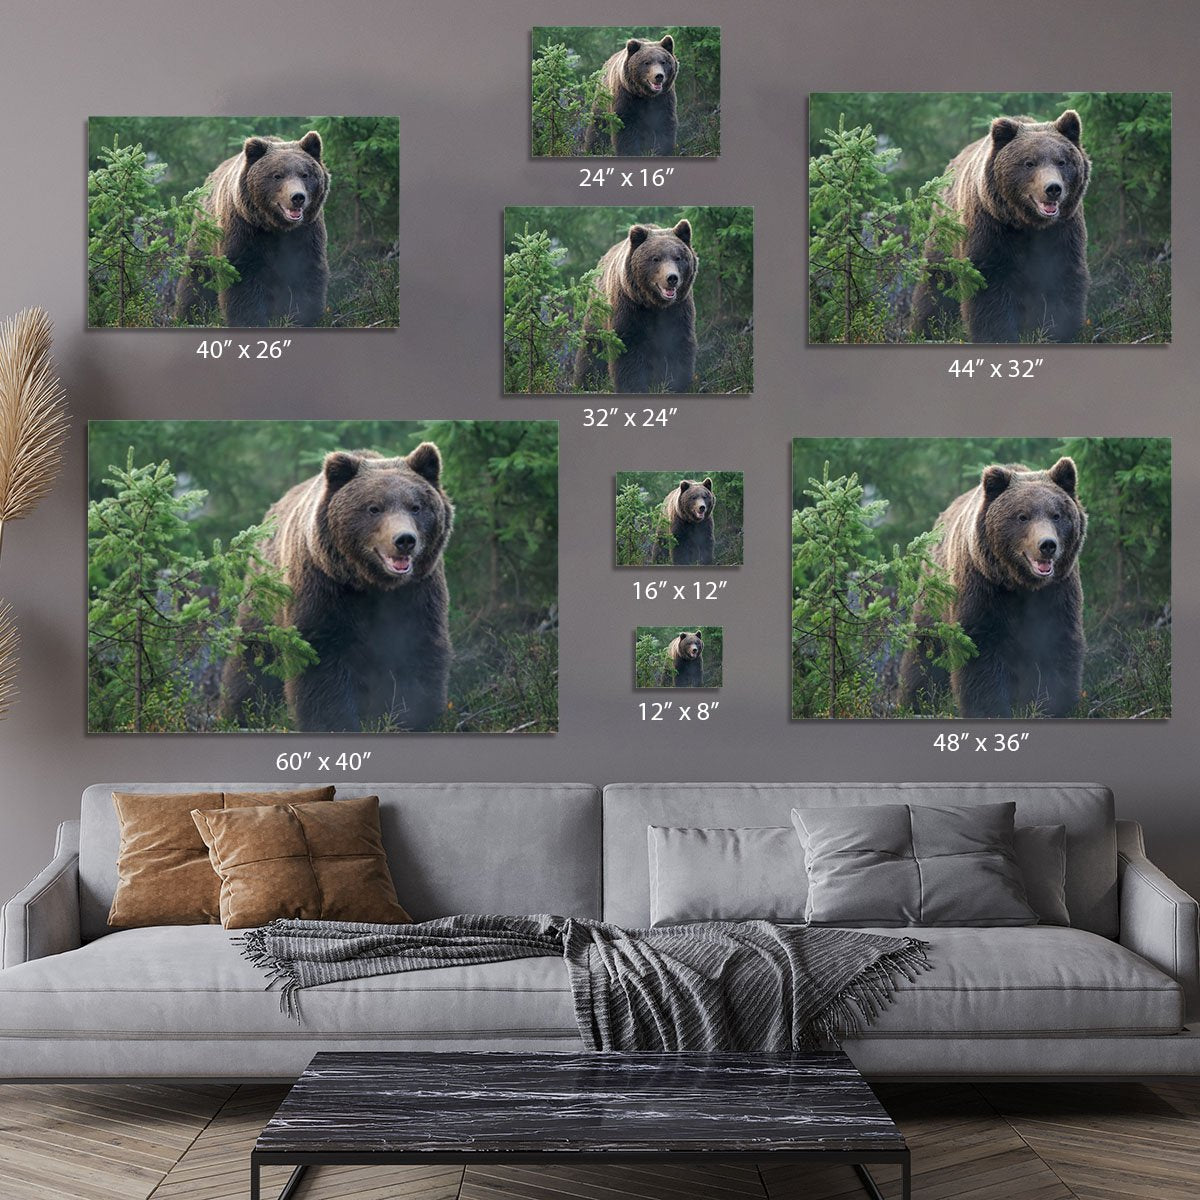 Bear in forest Canvas Print or Poster